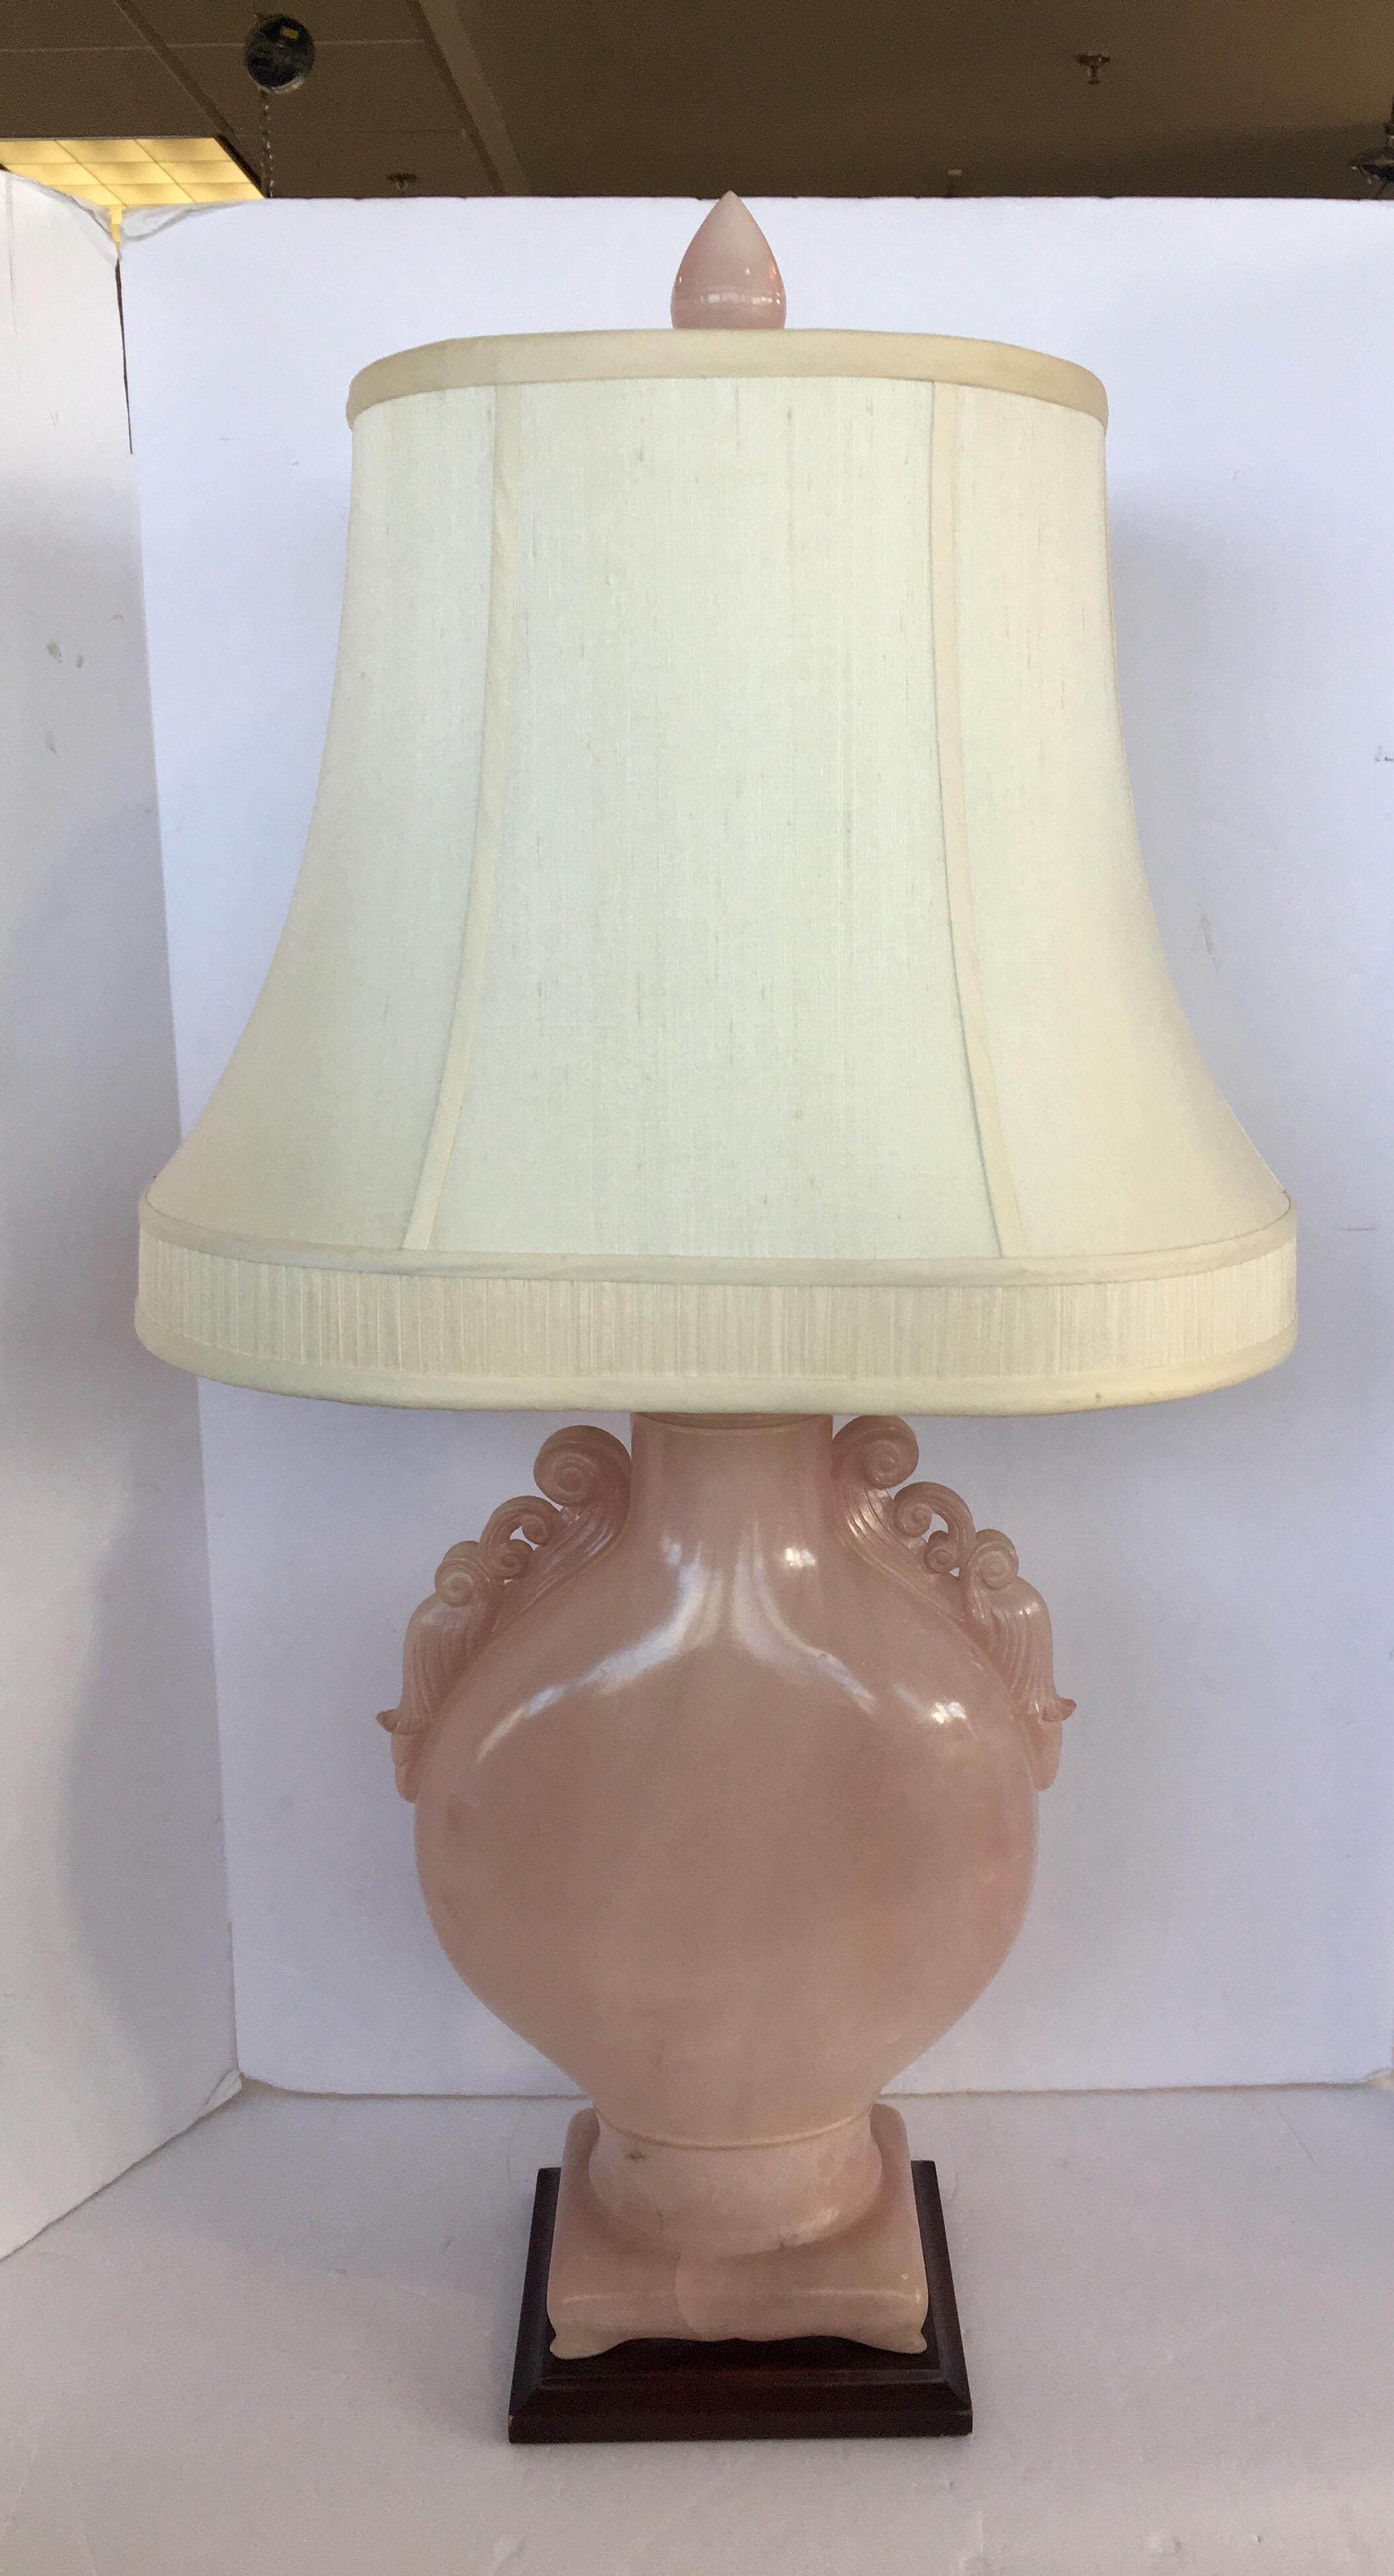 Large, Asian influenced, solid pink alabaster urn form lamp that rests atop a  wood base. Made by the famed Los Angeles based, Marbro Company which closed it's doors in the 1990. 

From 